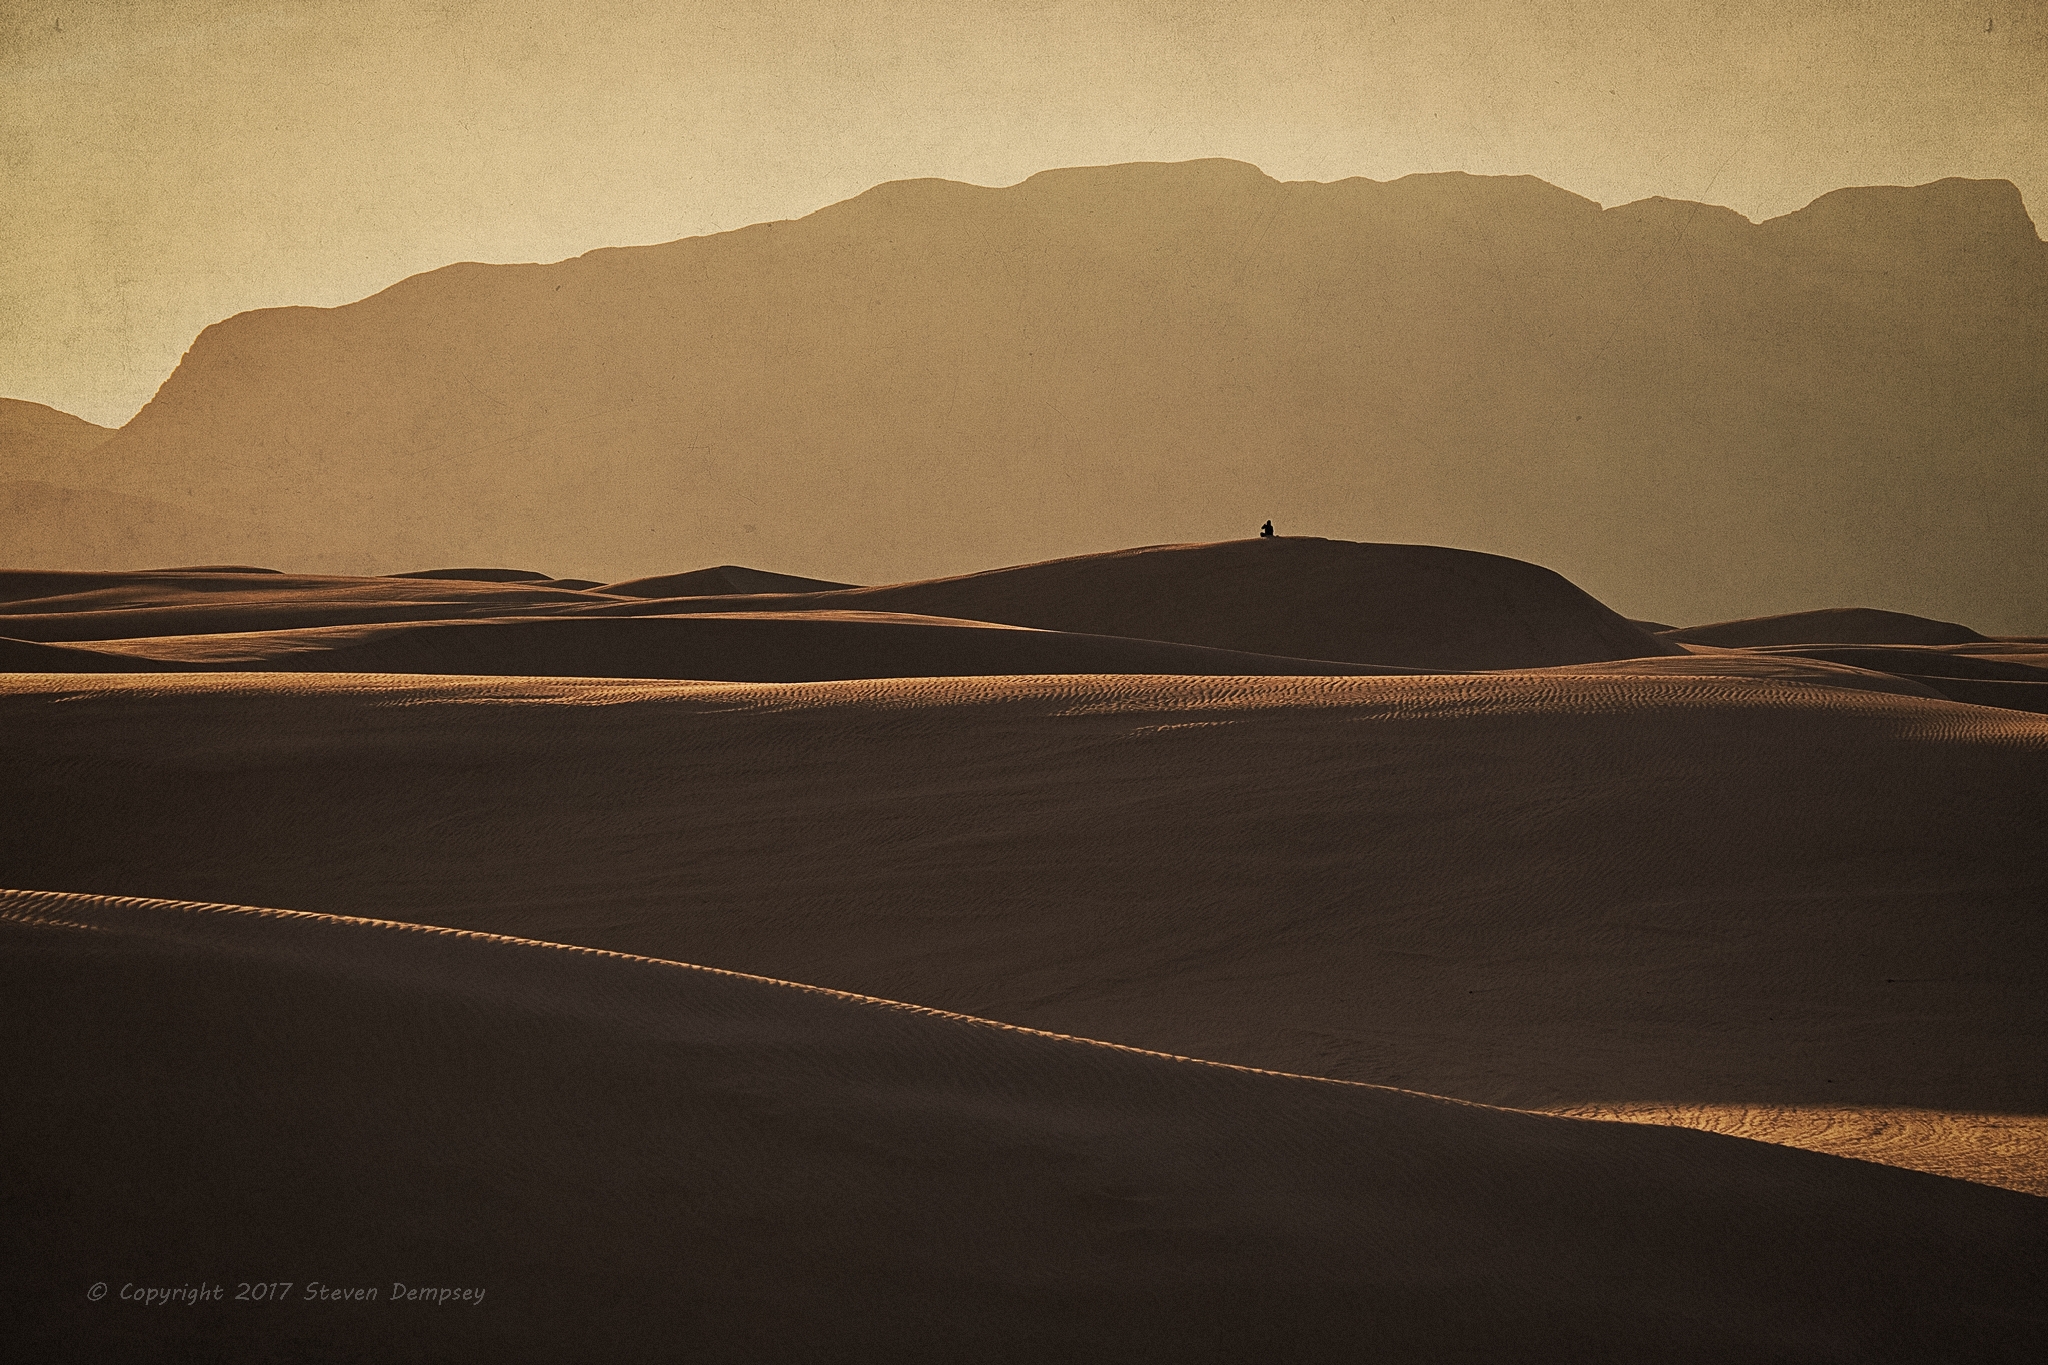 Alone on the Dunes